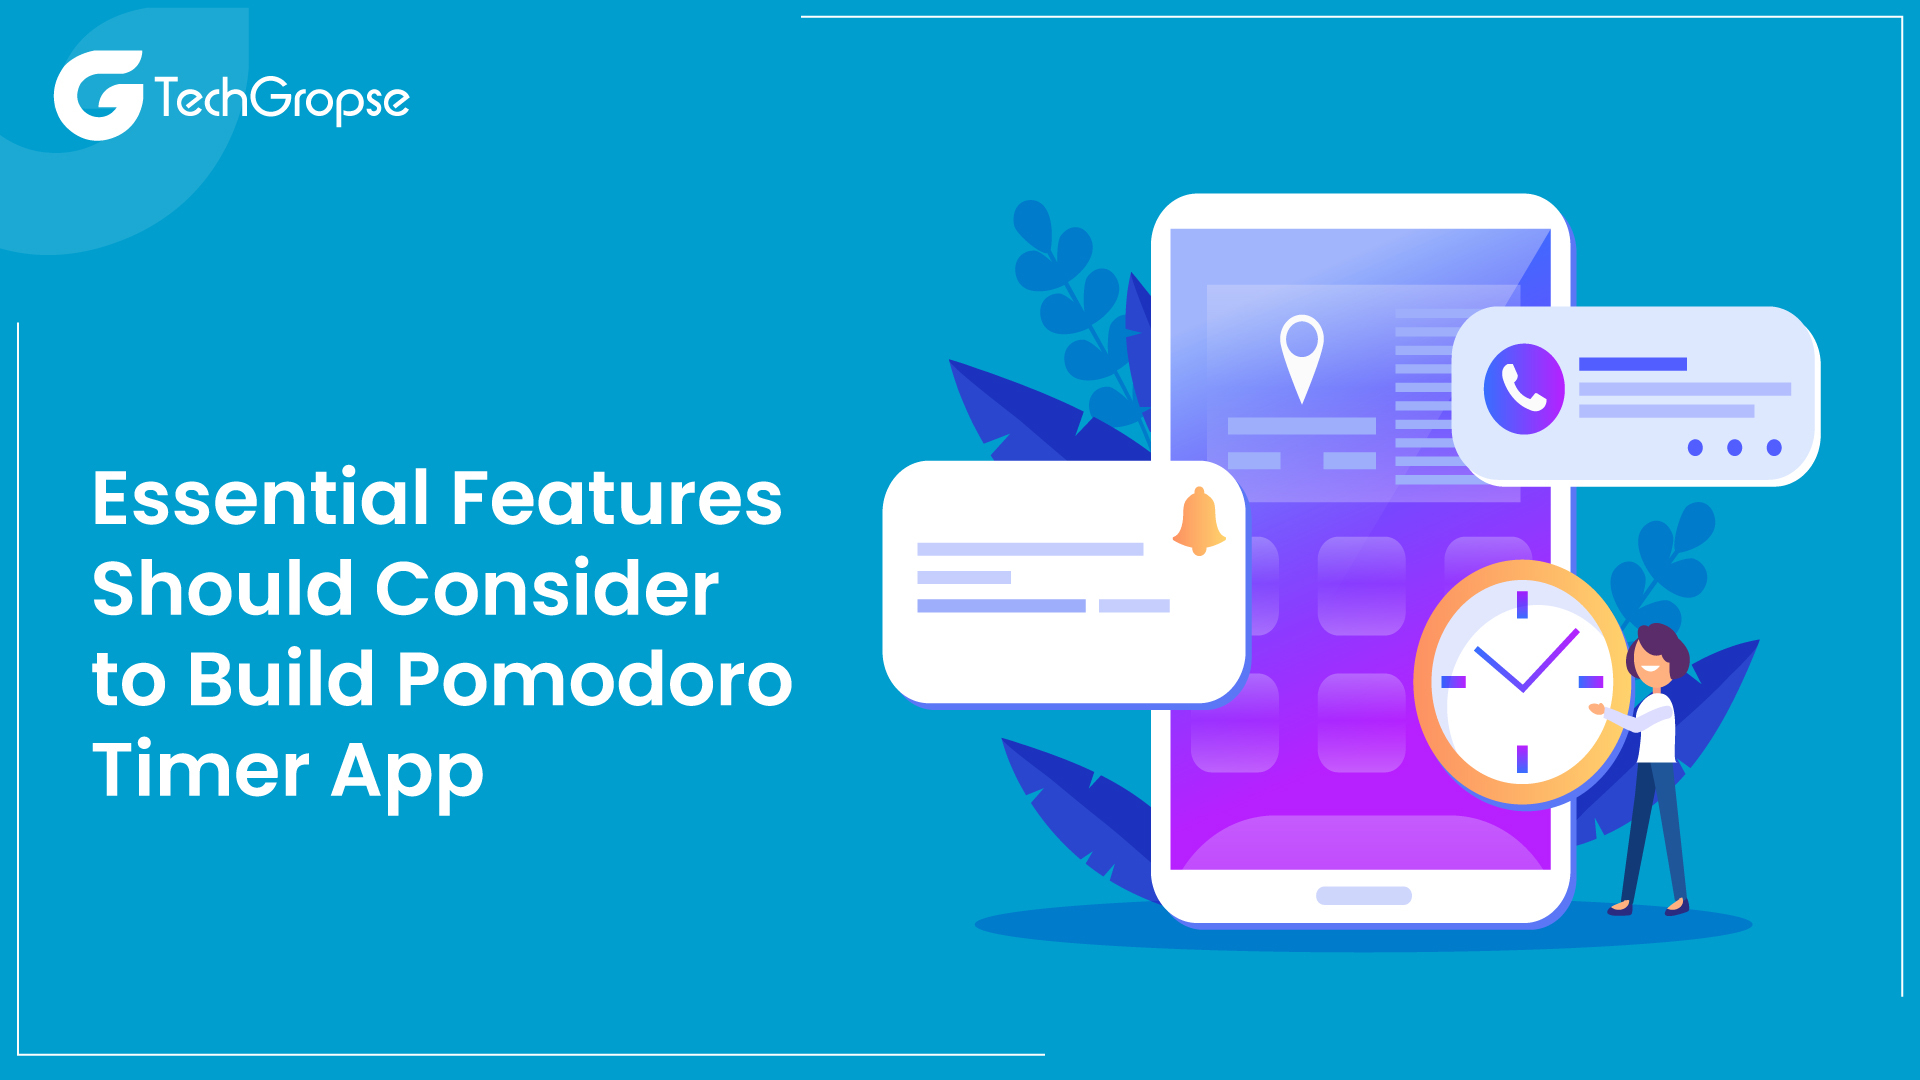 Essential Features Should Consider to Build Pomodoro Timer App